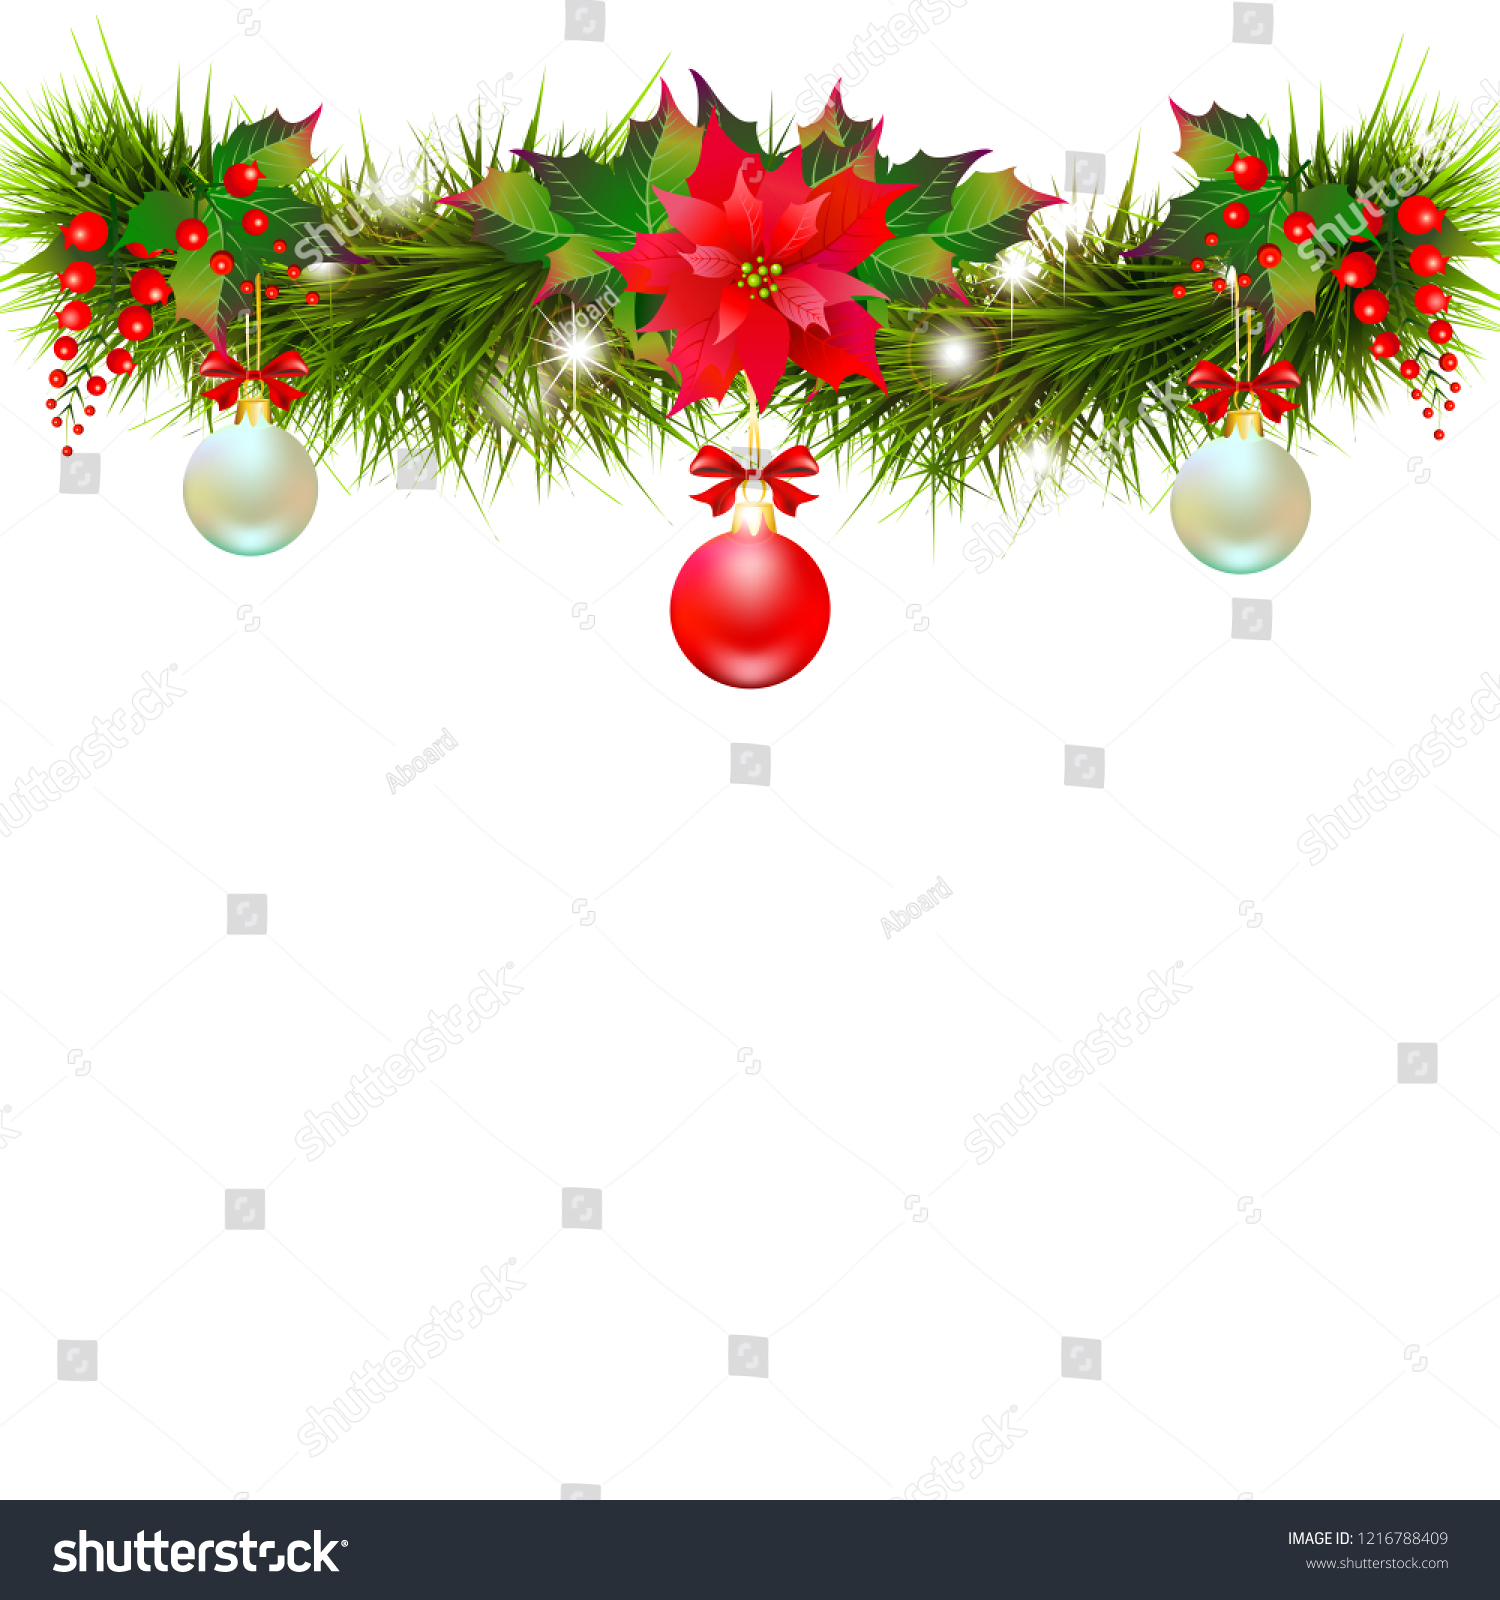 Christmas garland with poinsettia and cotton flowers, isolated on a white #1216788409